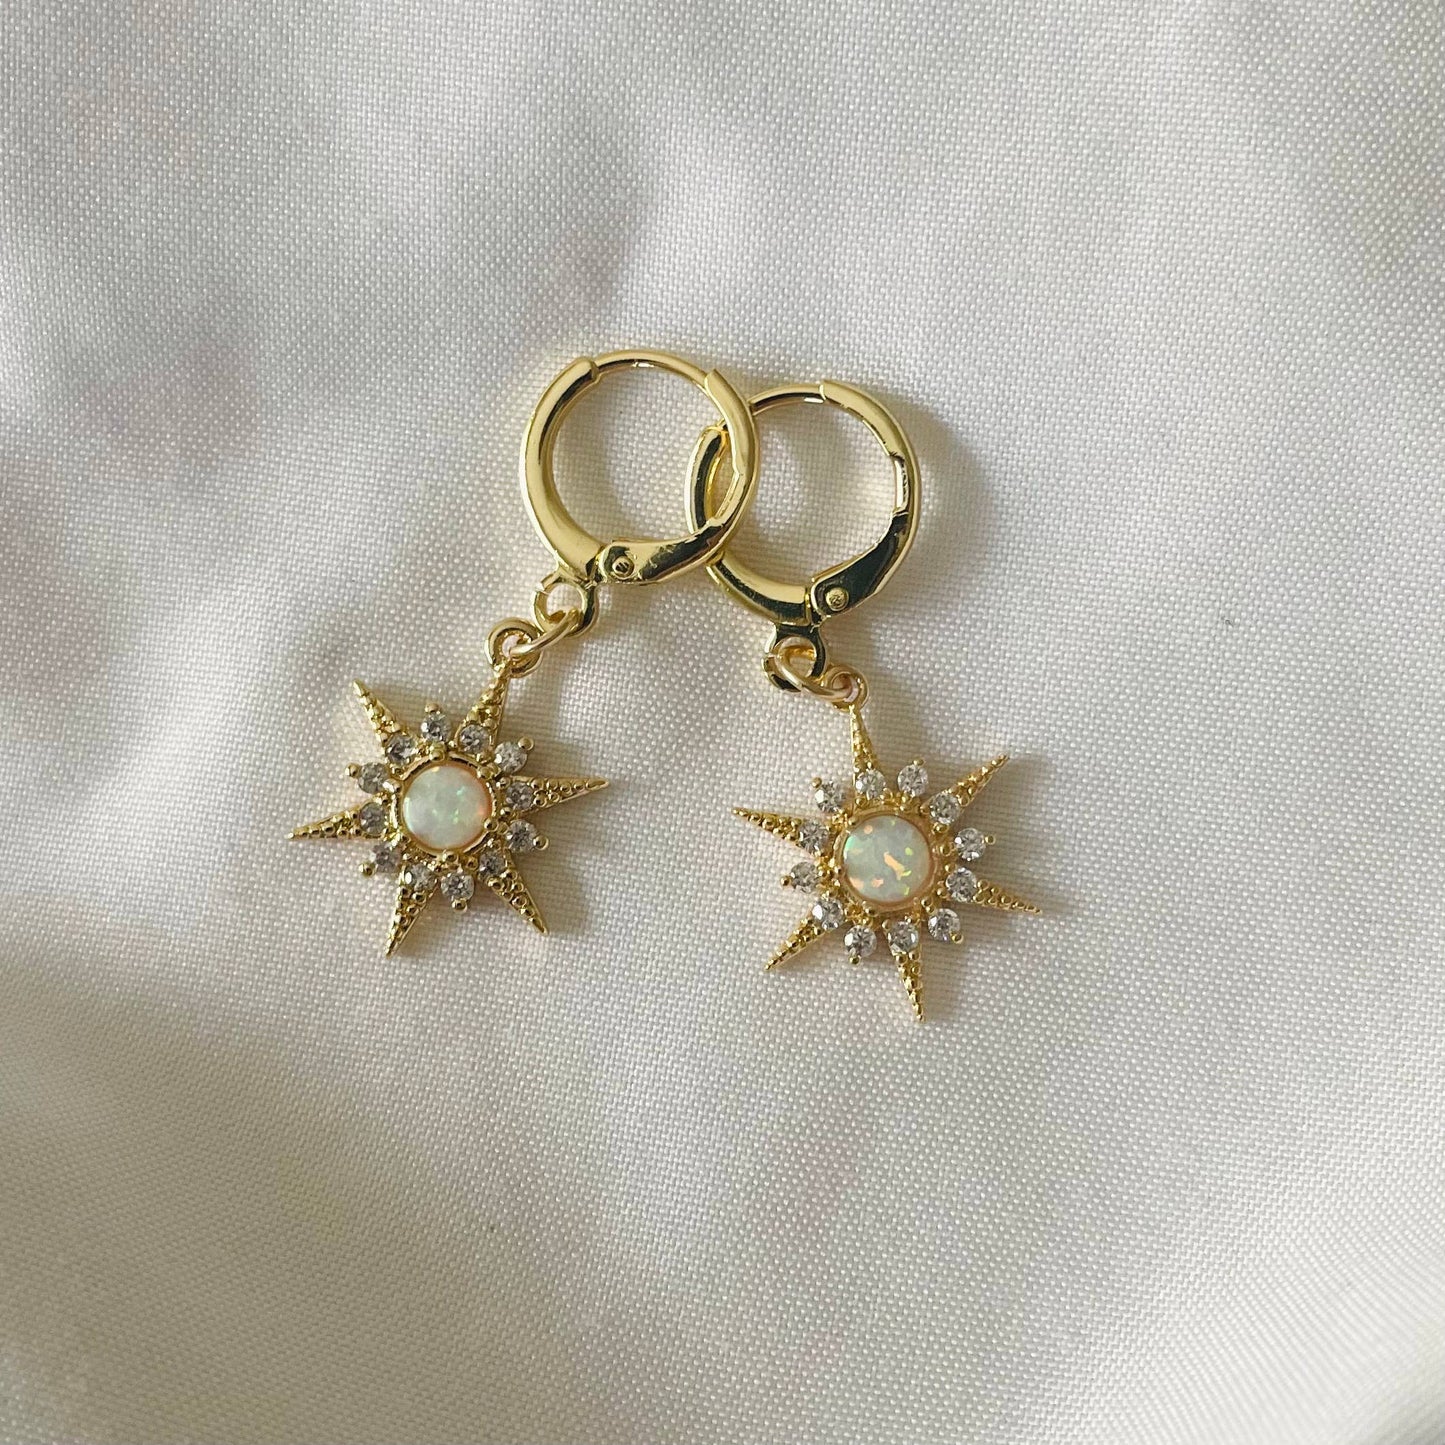 Searching for Love Opal Star Gold Filled Huggie Earrings